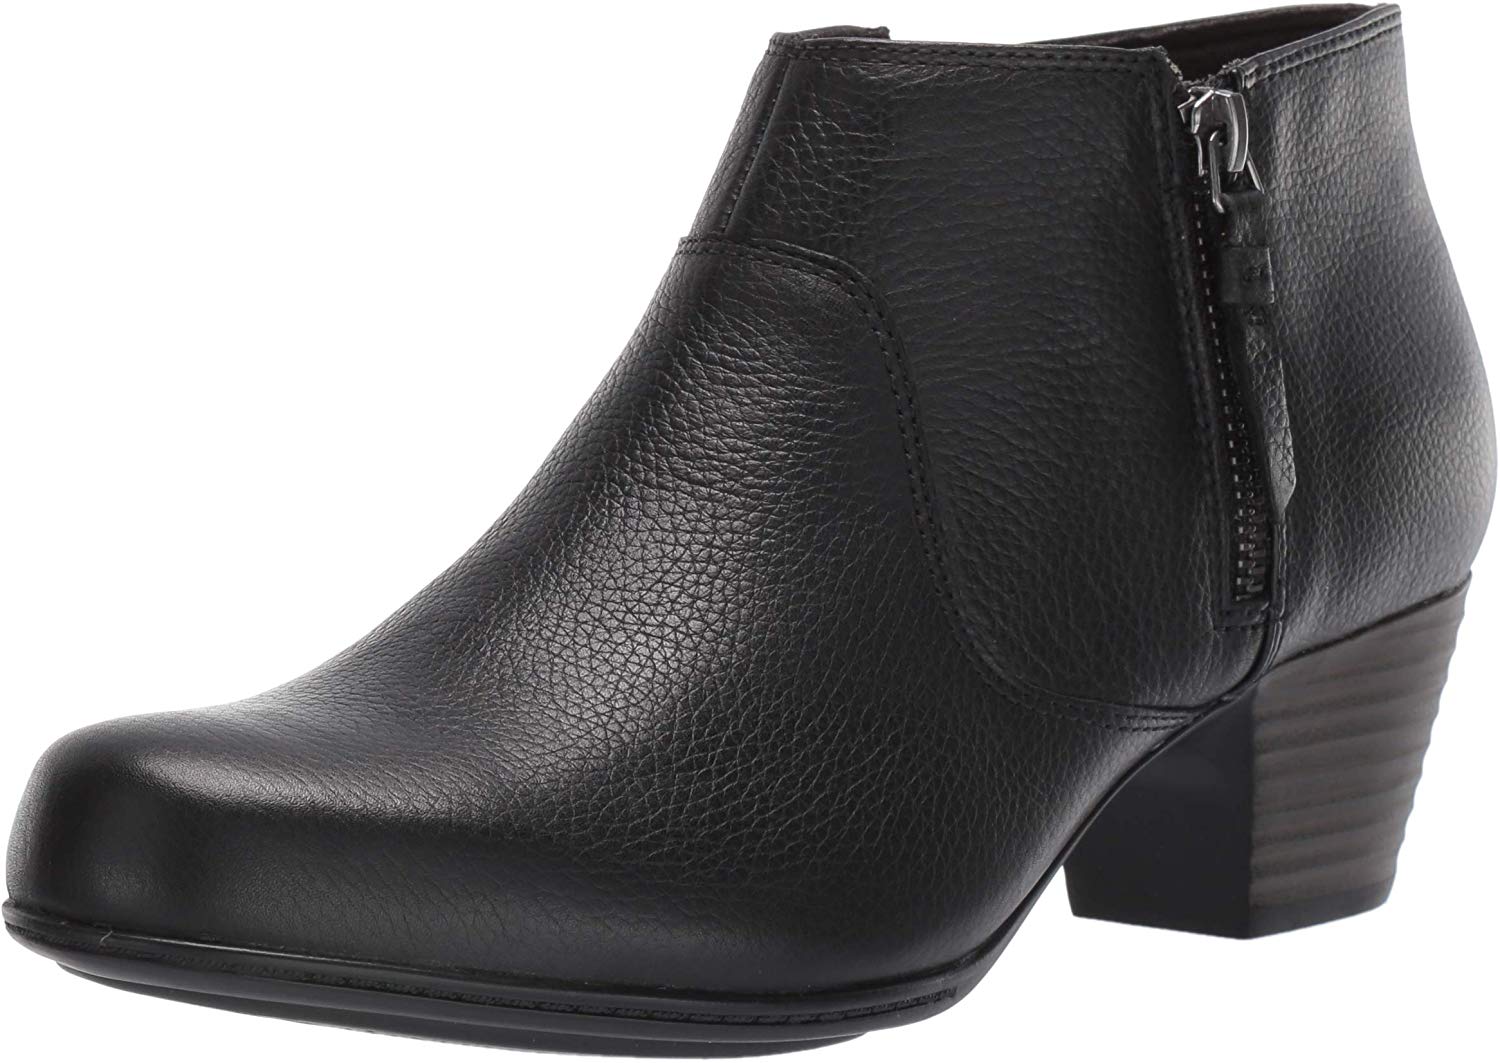 Clarks Women's Shoes Valarie Sofia Leather Almond Toe Ankle, Black ...